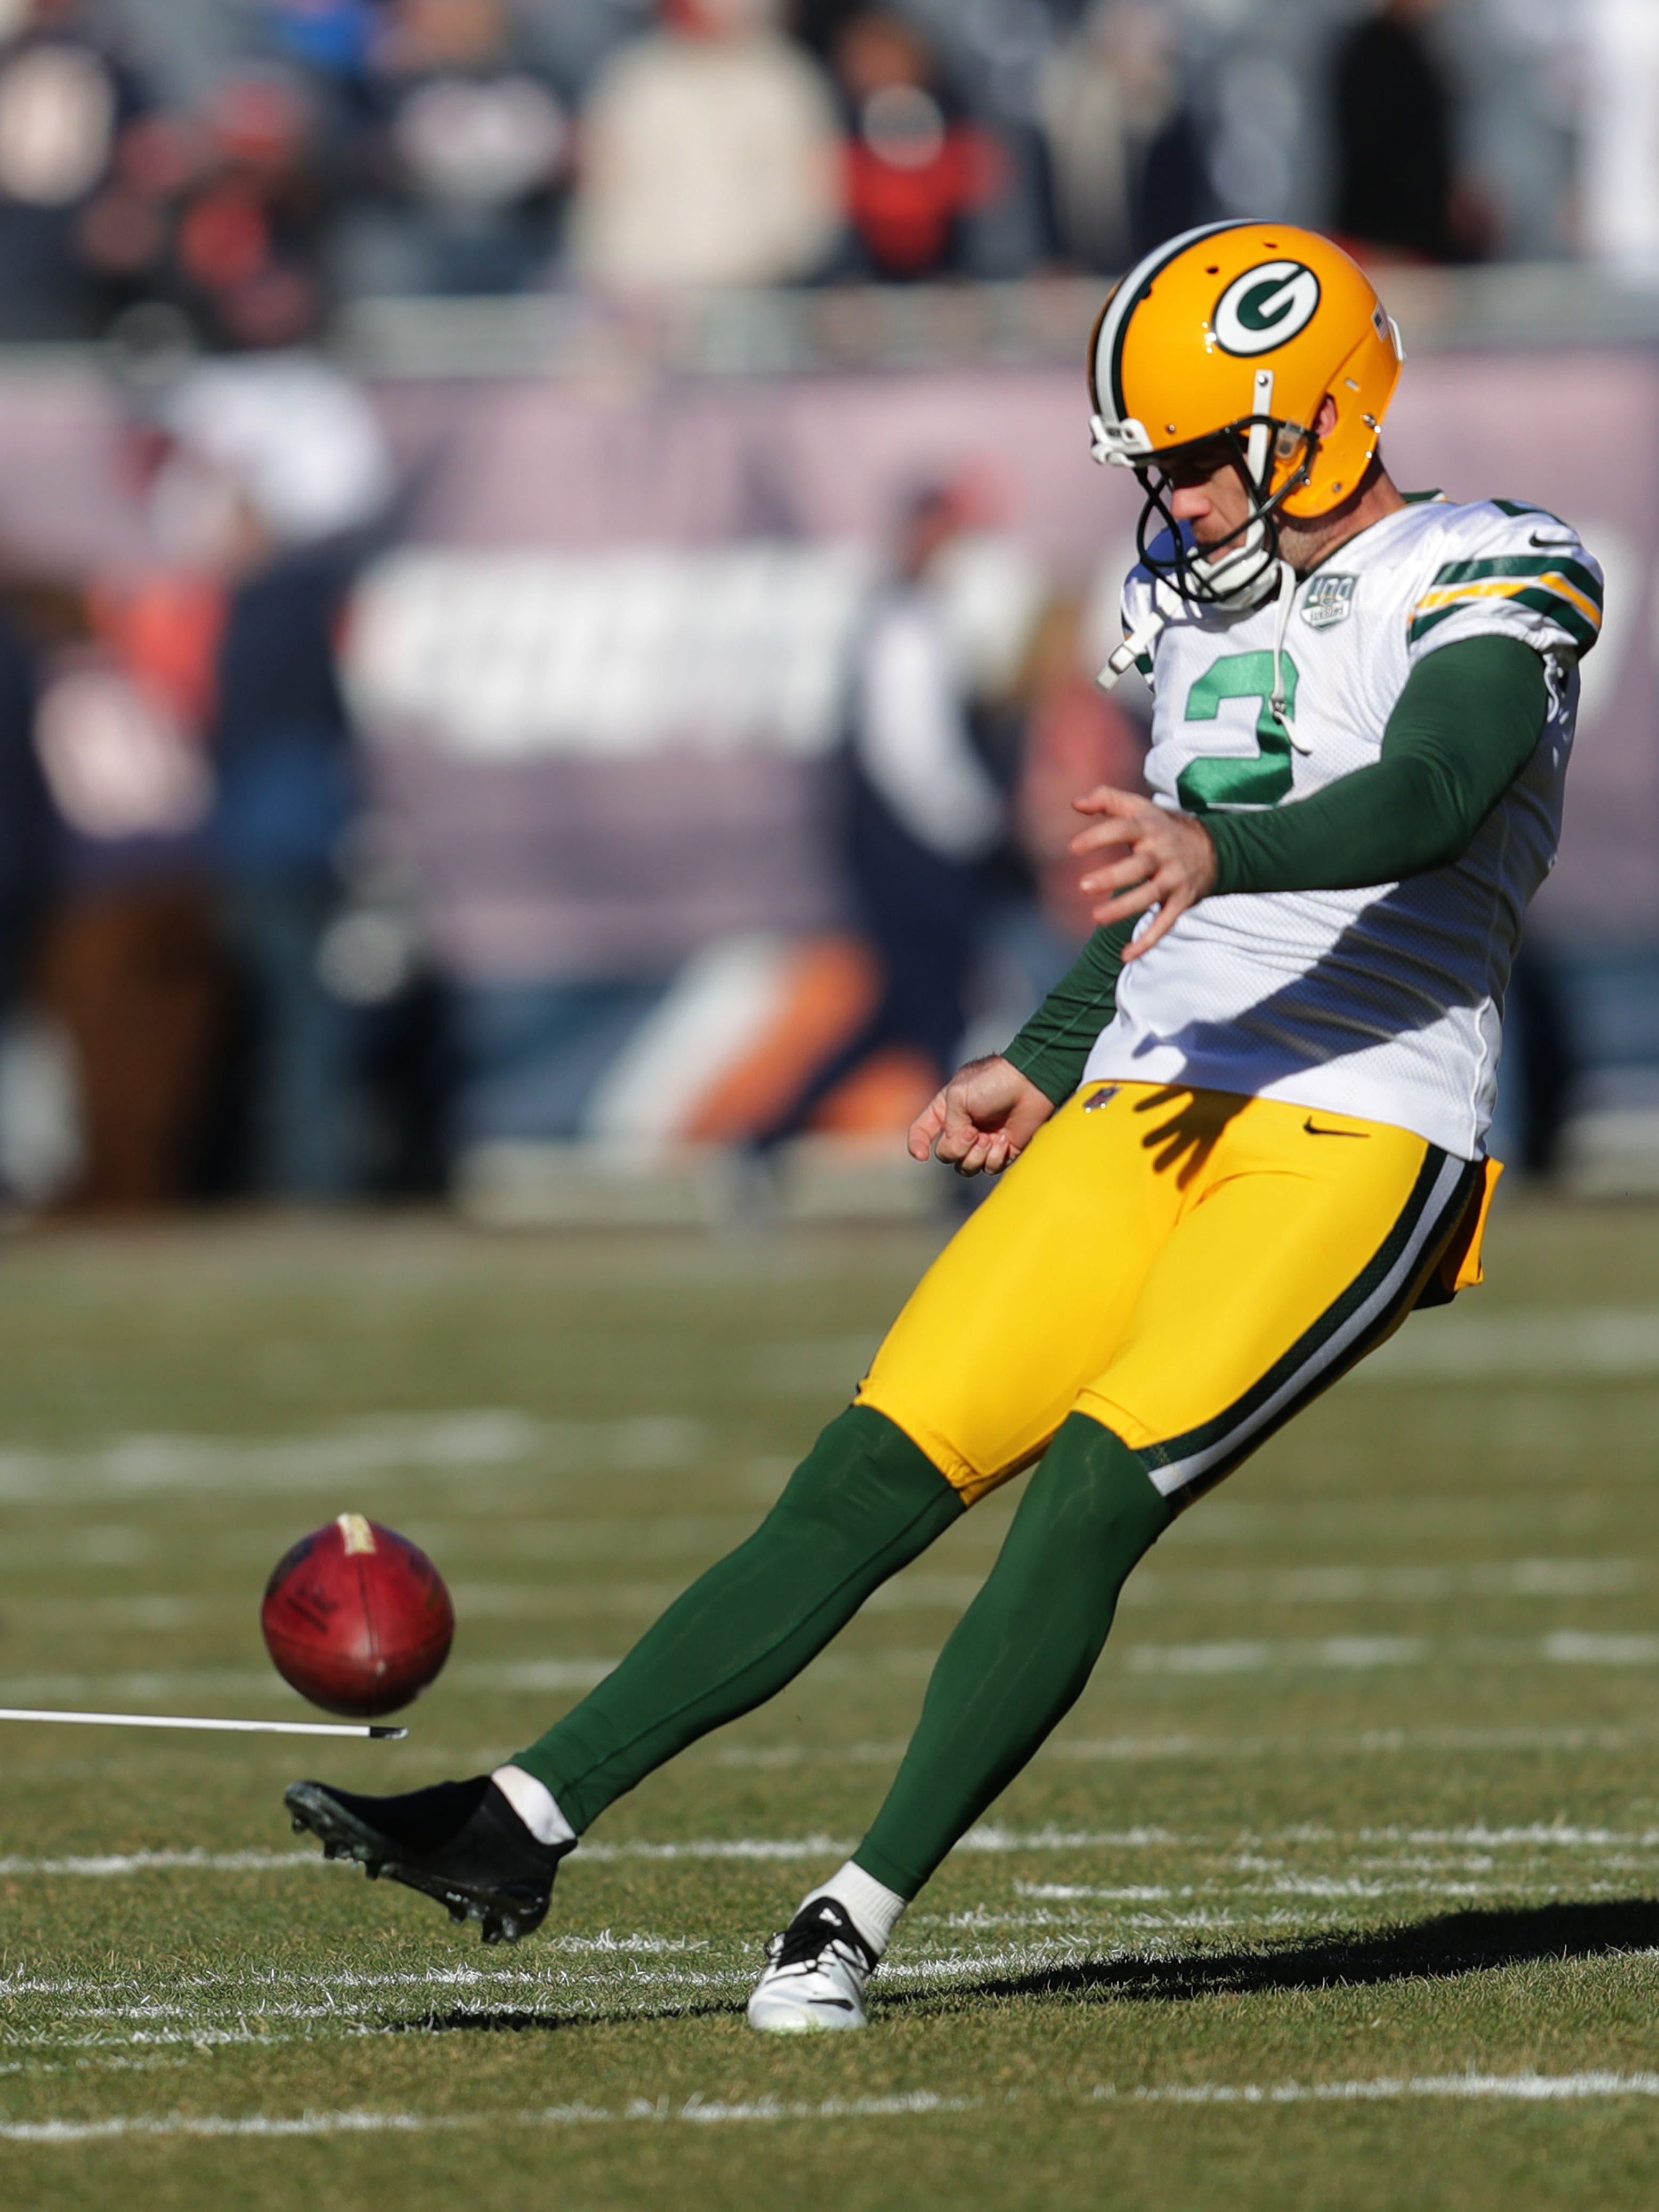 Green Bay Packers' Mason Crosby warms up before the Green Bay Packers game against the Chicago Bears at Soldier Field Sunday, Dec. 16, 2018, in Chicago. Photo by Mike De Sisti / The Milwaukee Journal Sentinel